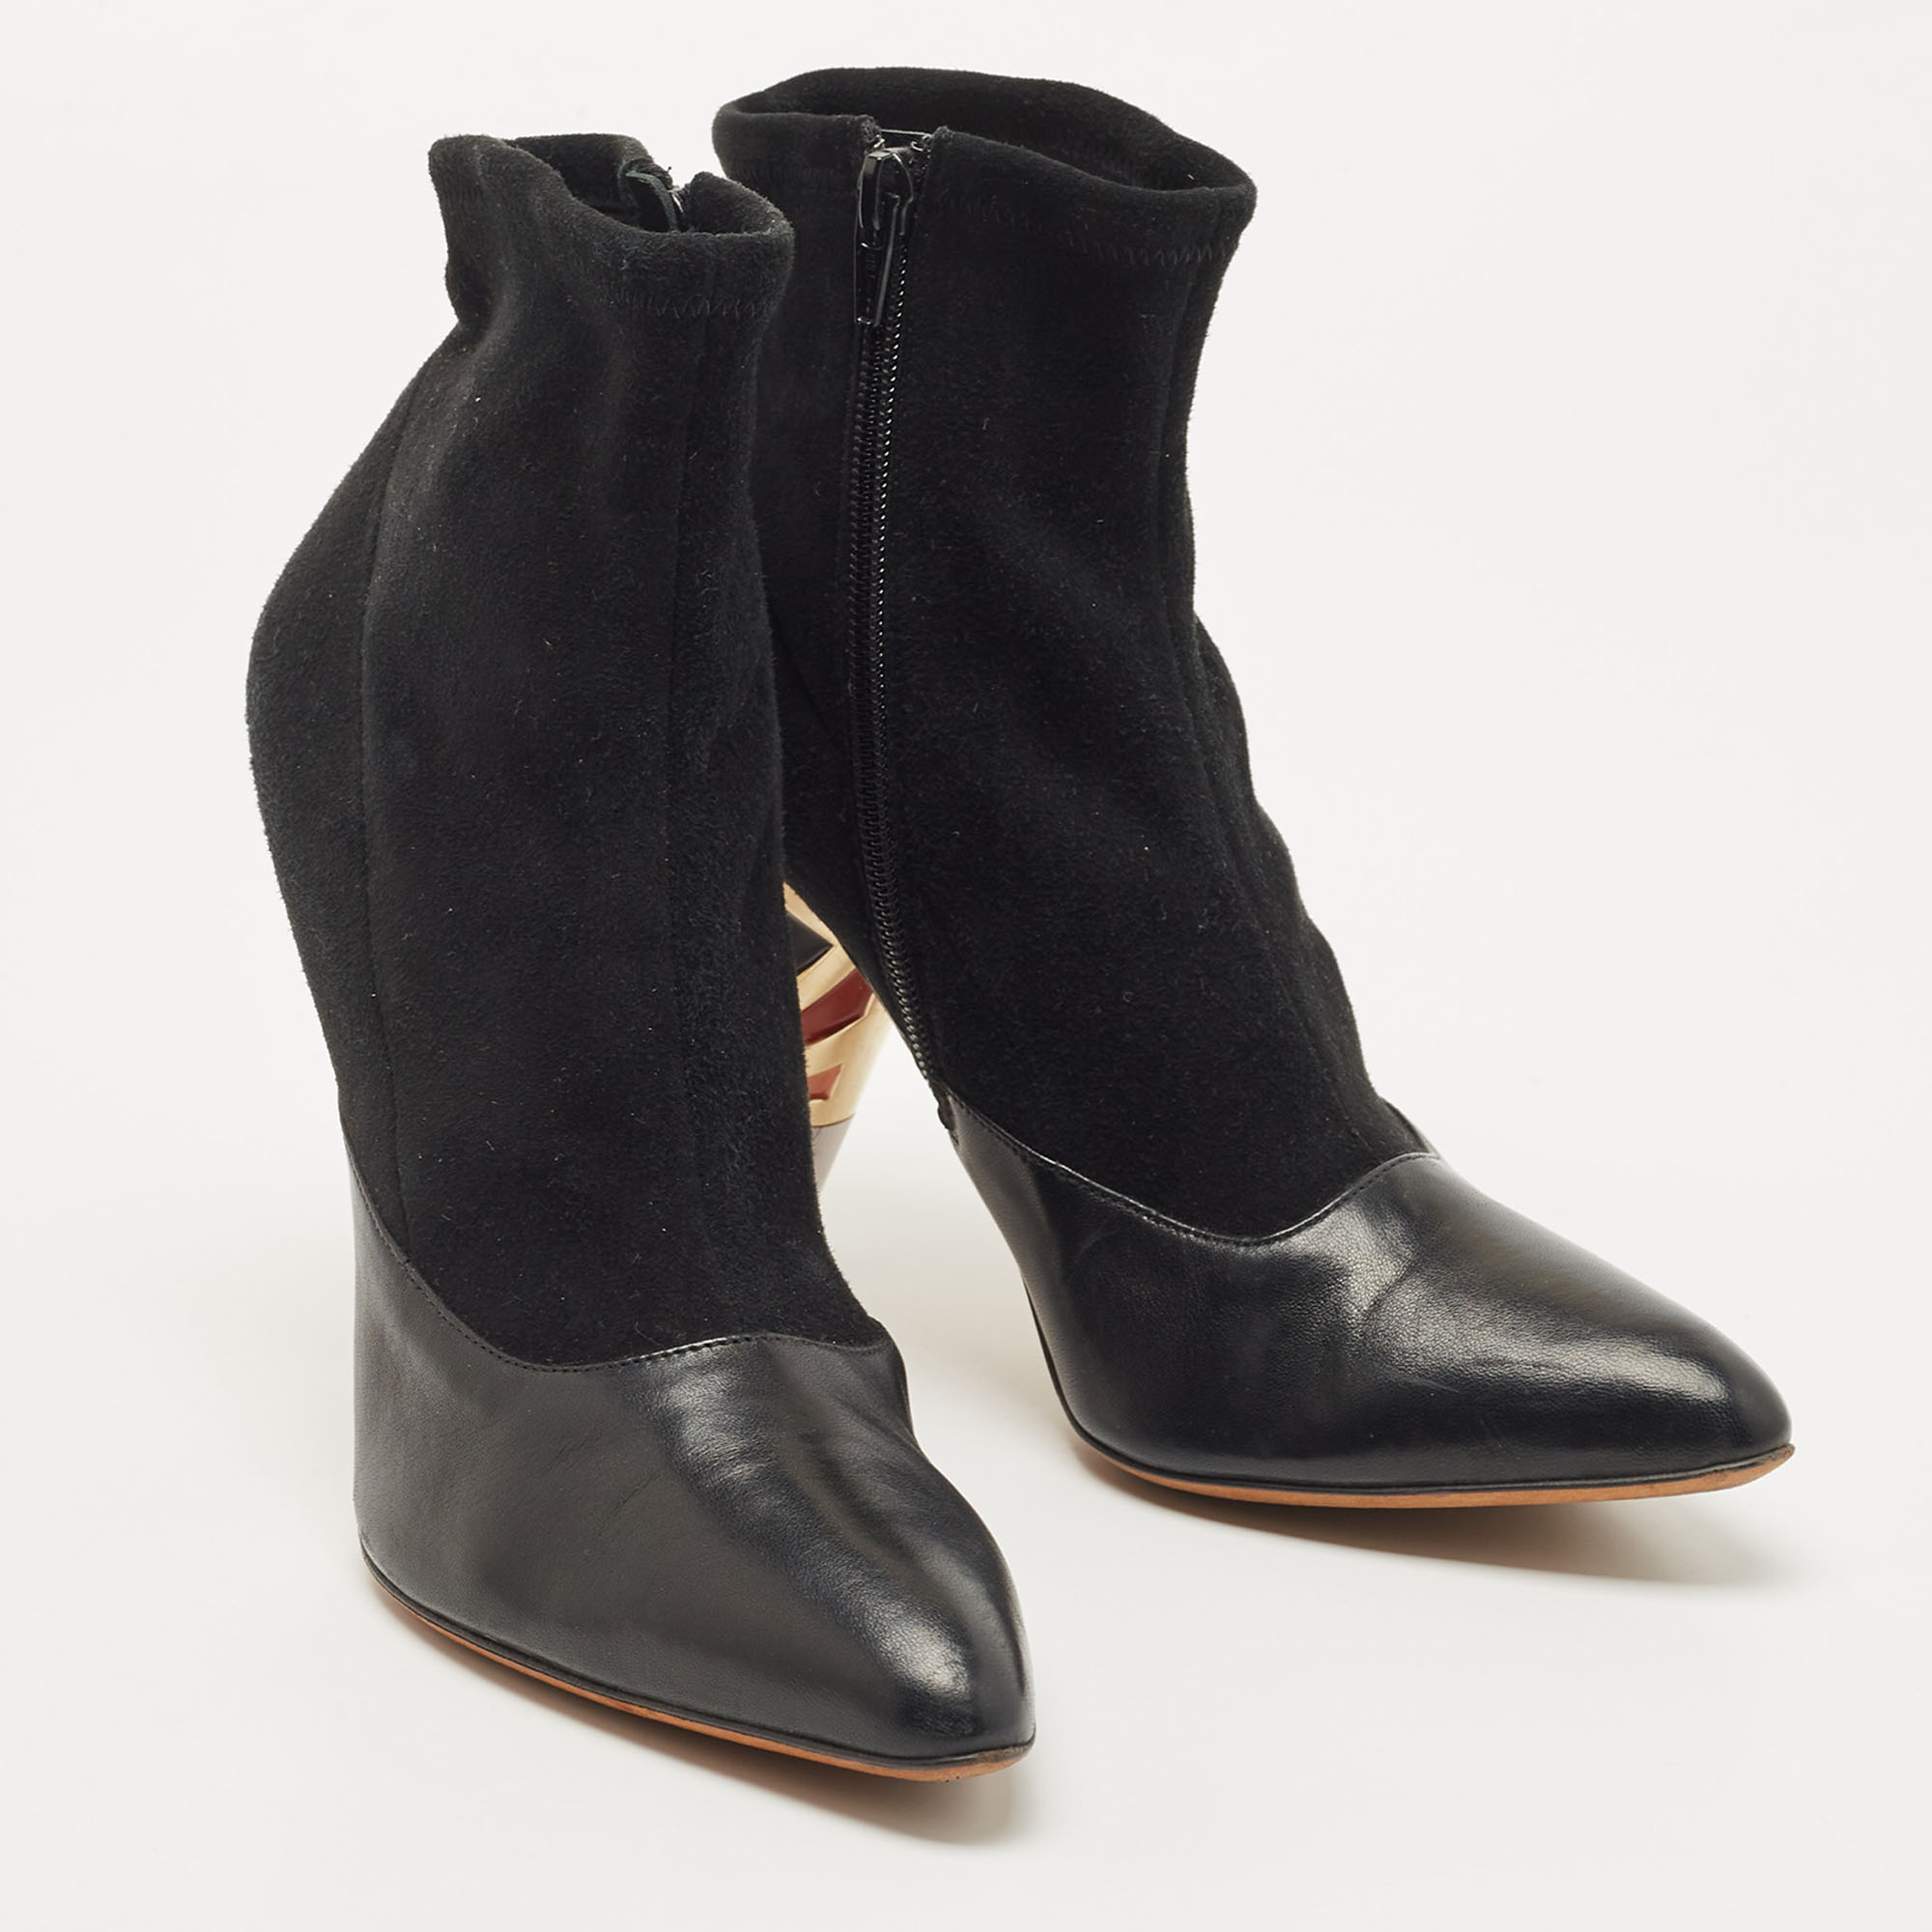 Givenchy Black Suede Ankle Boots Size 40